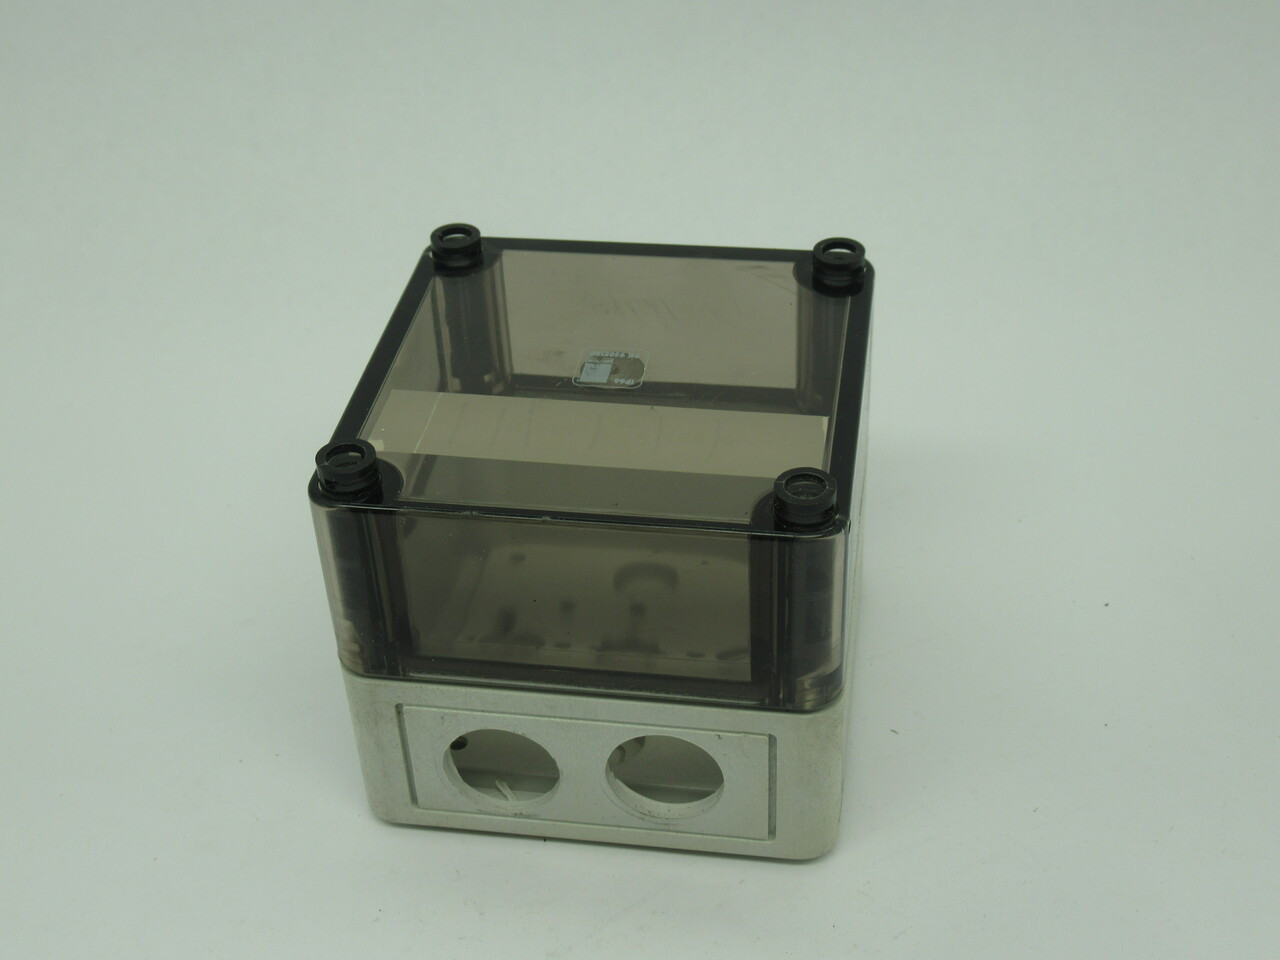 Rittal PK9505100 Enclosure With 2 Knockouts 3-1/2" x 3-1/2" USED